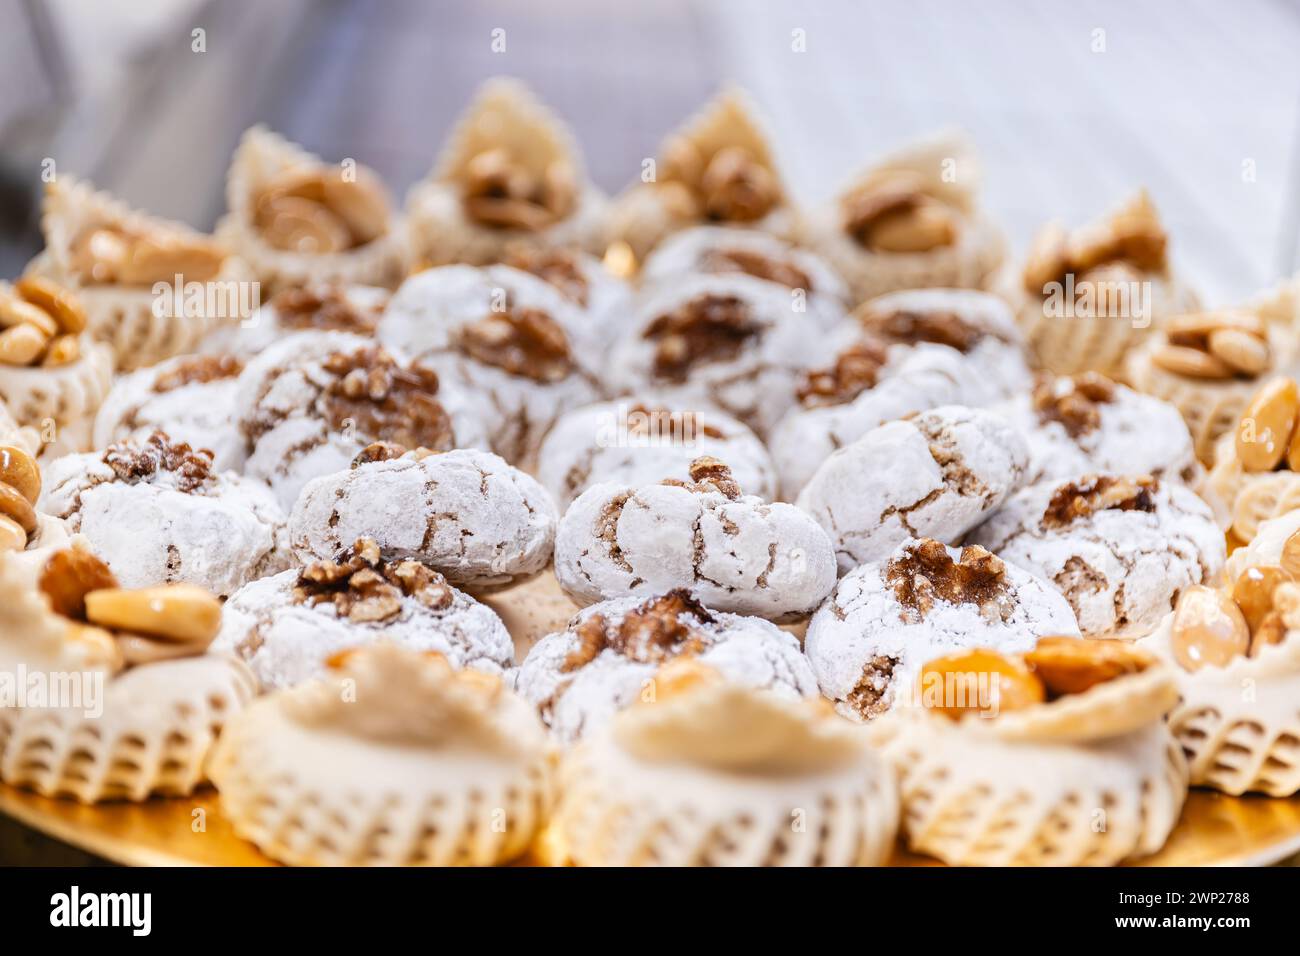 Horizontal photo a close-up of a golden platter filled with walnut-dusted pastries, capturing the essence of Middle Eastern confectionery in festive p Stock Photo